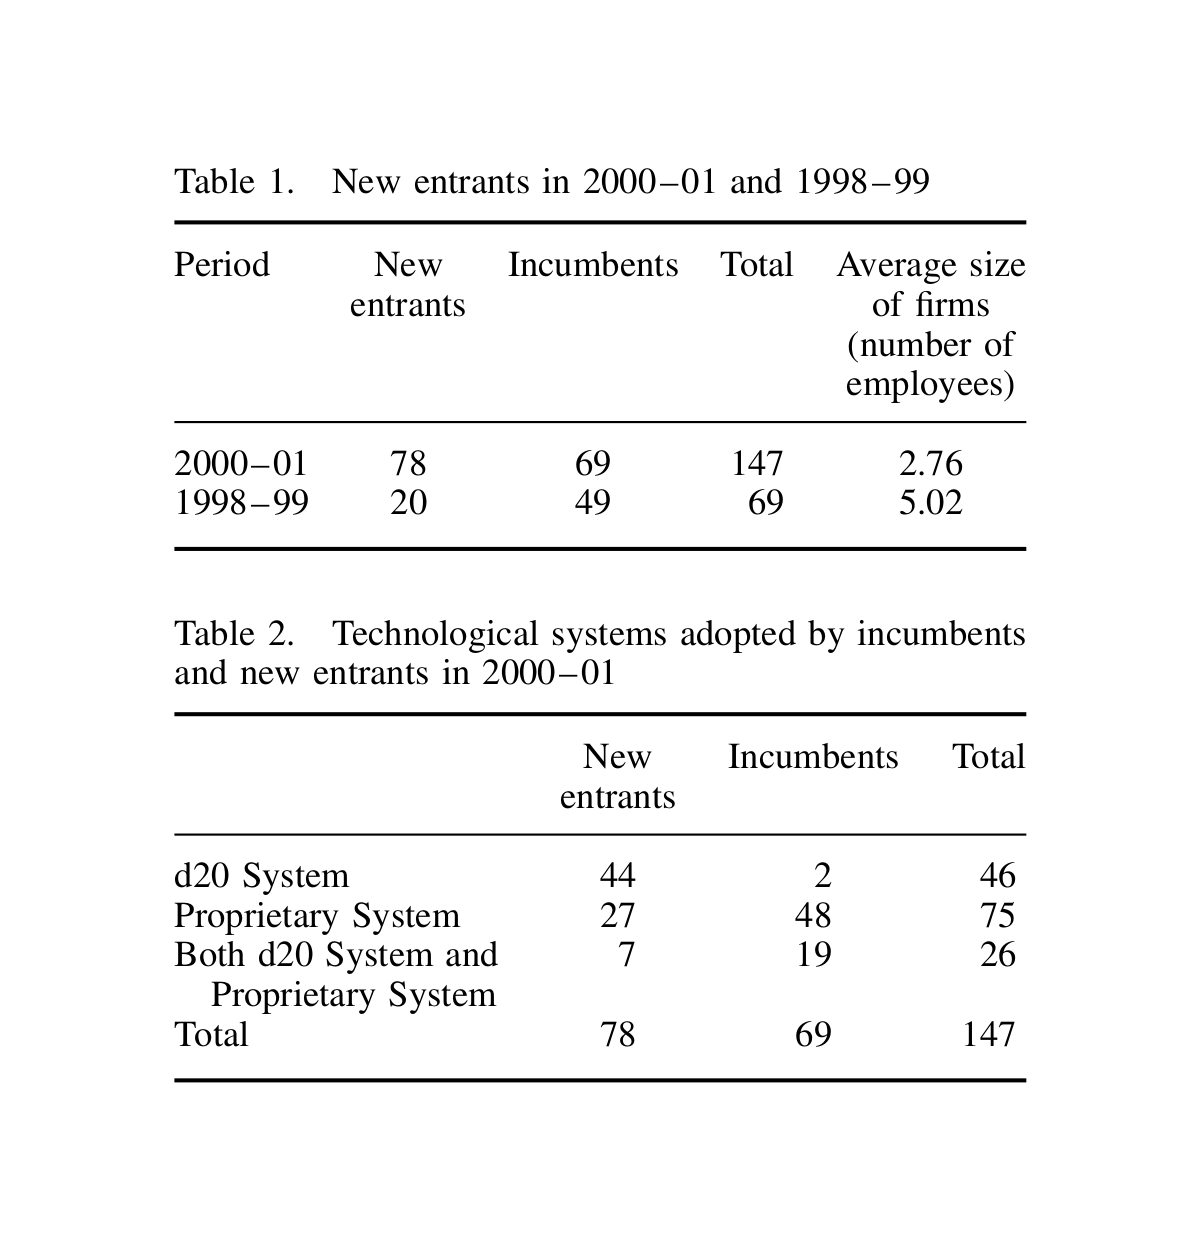 Table 1: New entrants in 2000–01 and 1998–99 / Table 2: Technological systems adopted by incumbents and new entrants in 2000–01